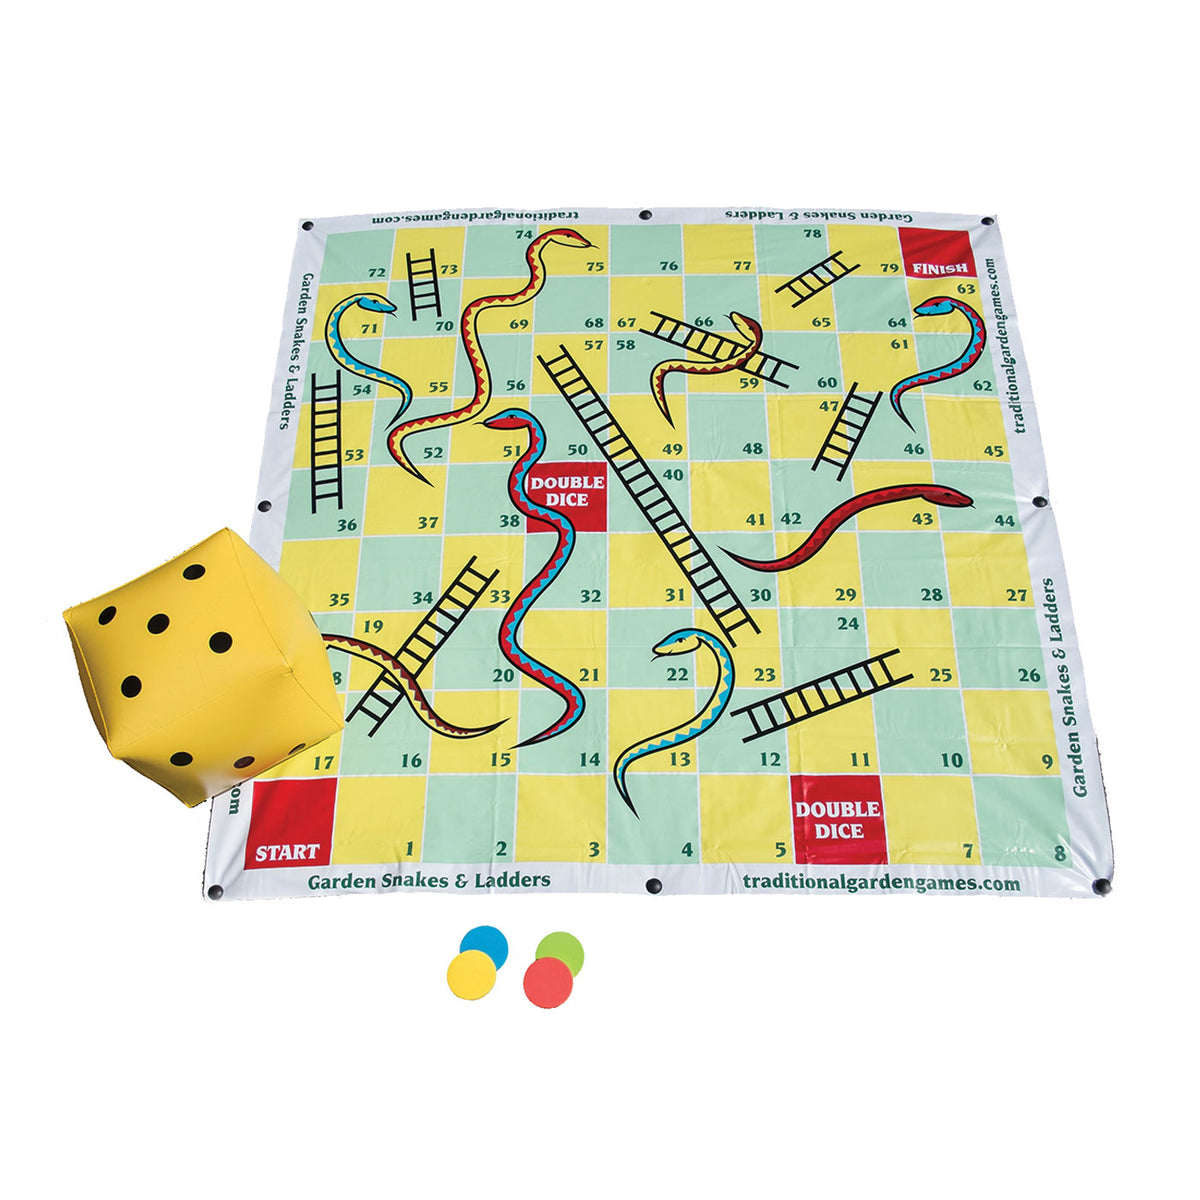 Garden Snakes and Ladders 2m x 2m